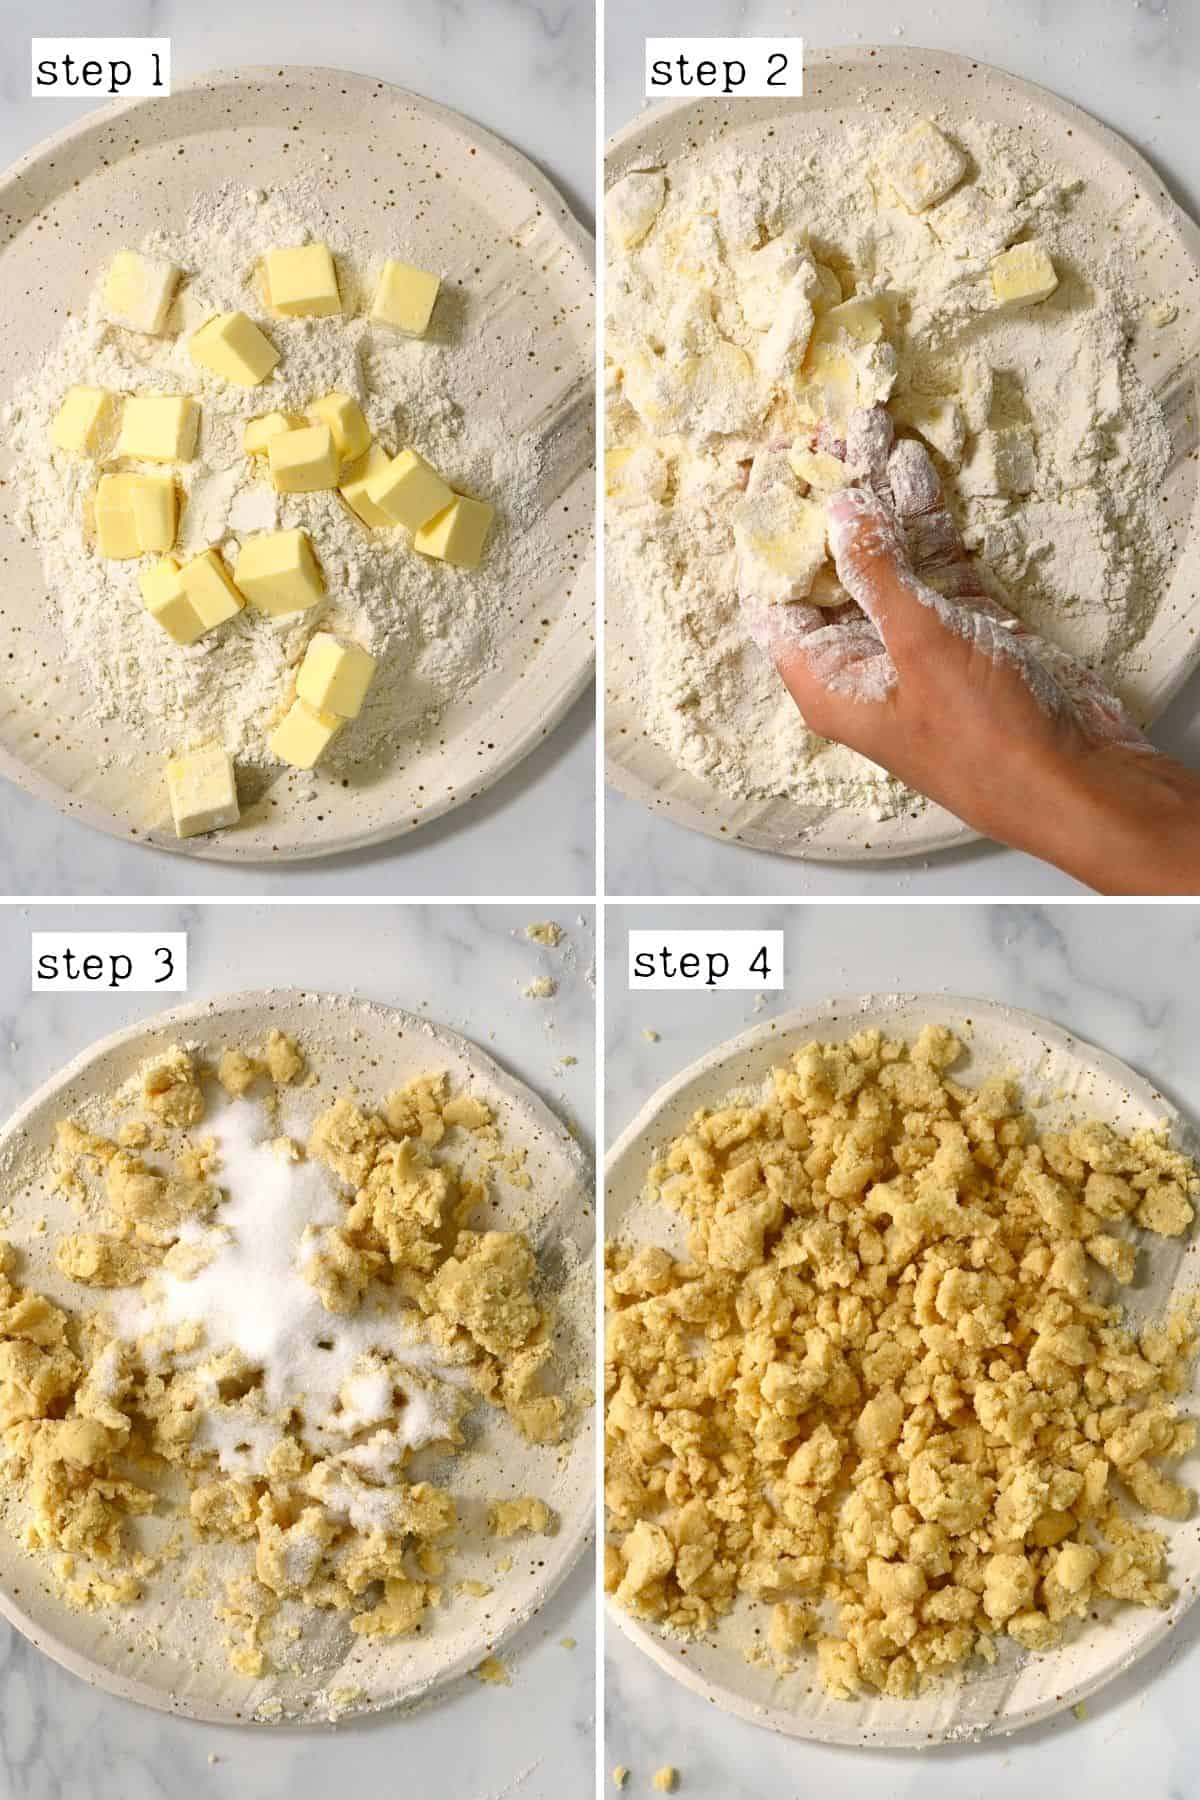 Steps for preparing crumble topping